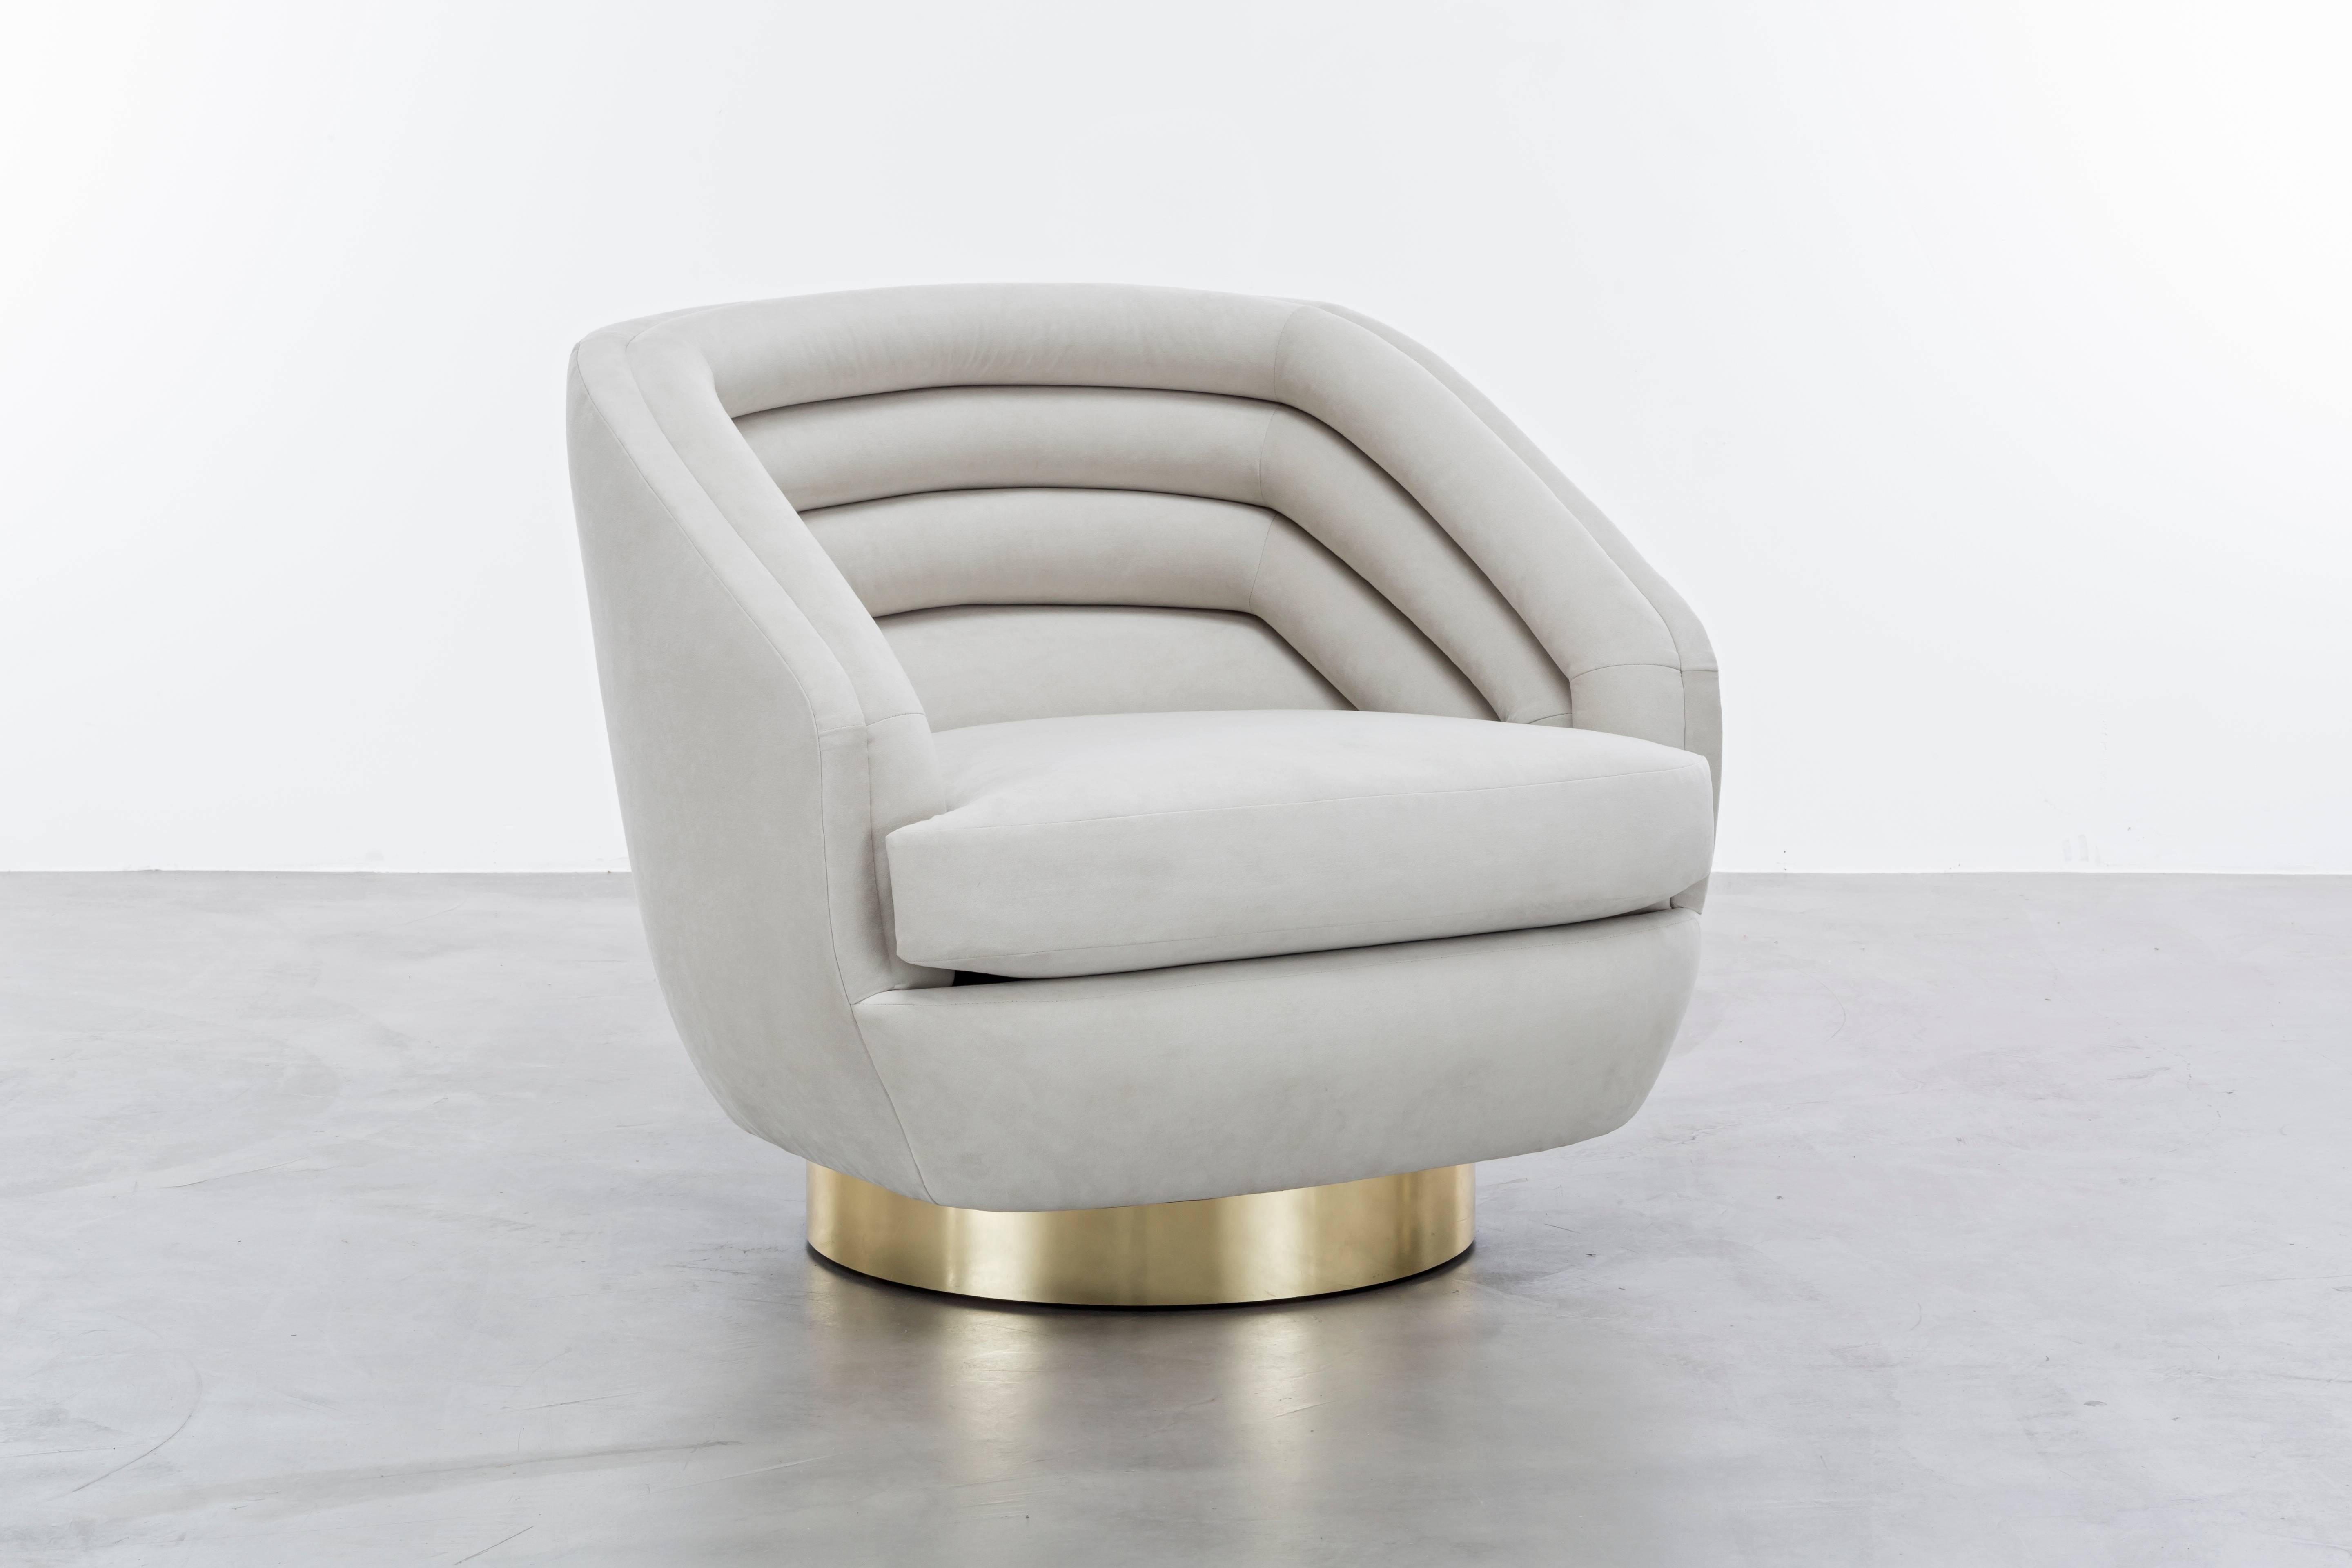 RAOUL SWIVEL CHAIR  - Modern Ultra Suede Swivel Chair with Brass Base

The Raoul Chair is a luxurious and stylish piece of furniture that is inspired by the iconic fashion designer Jean Paul Gaultier. The chair features horizontal velvet channels